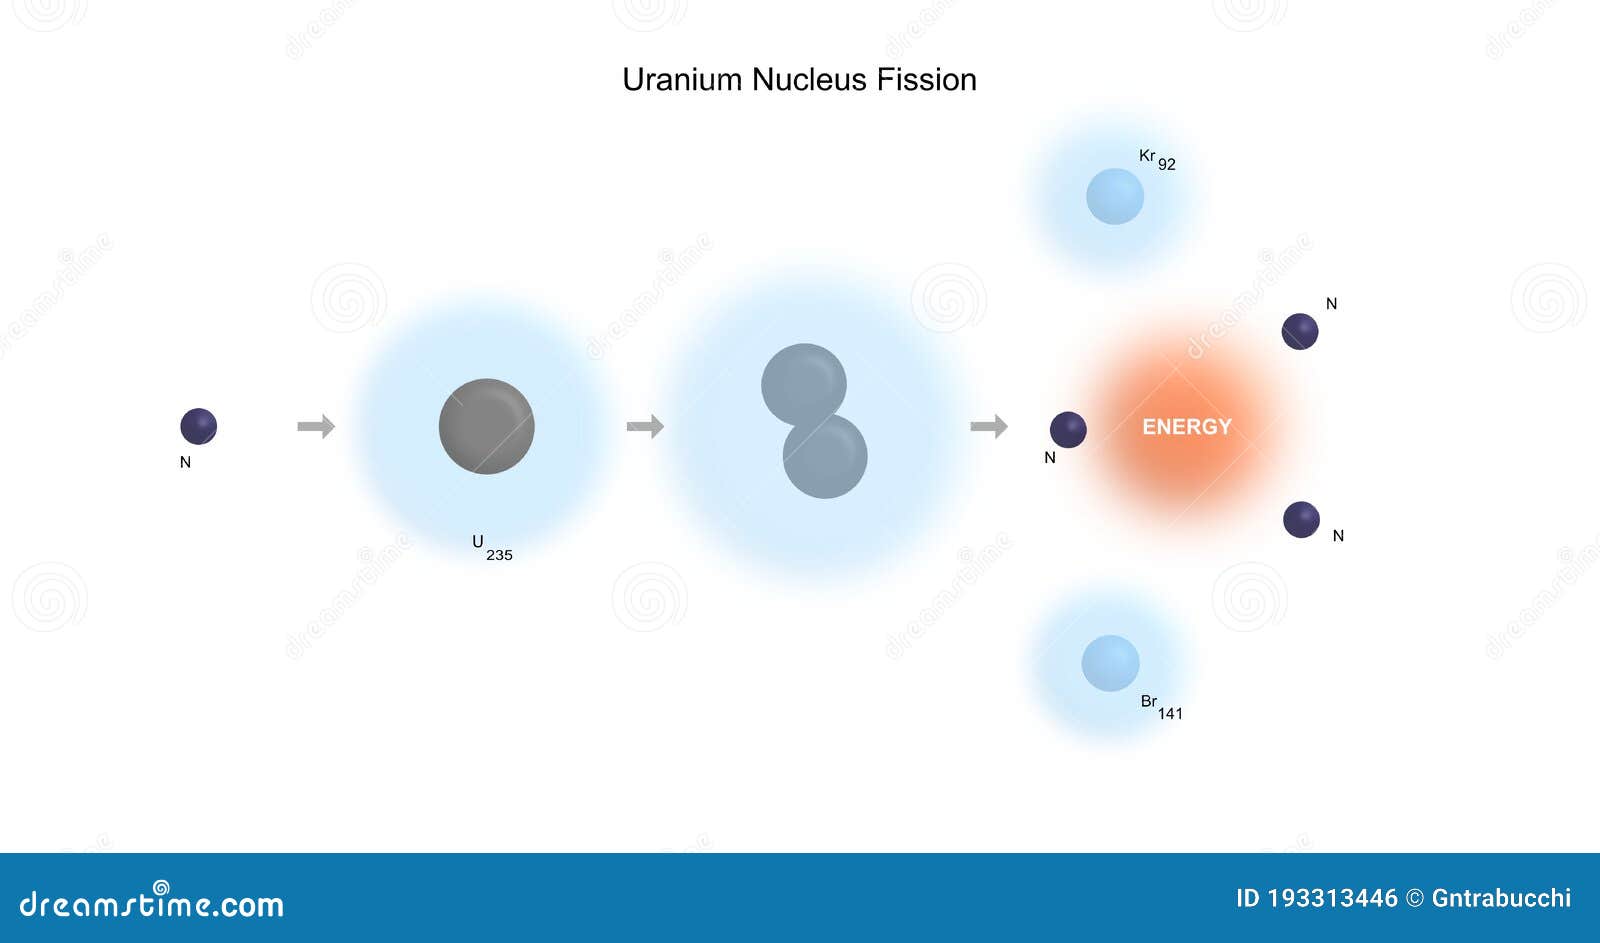 Уран элемент 235. Nuclear Fission Reaction 235 Uranium. Fission products Uranium-235 nuclear Fission Reaction. Ядерная реакция урана 235. Lisa Meitner picture of Fission of Uranium Nucleus.